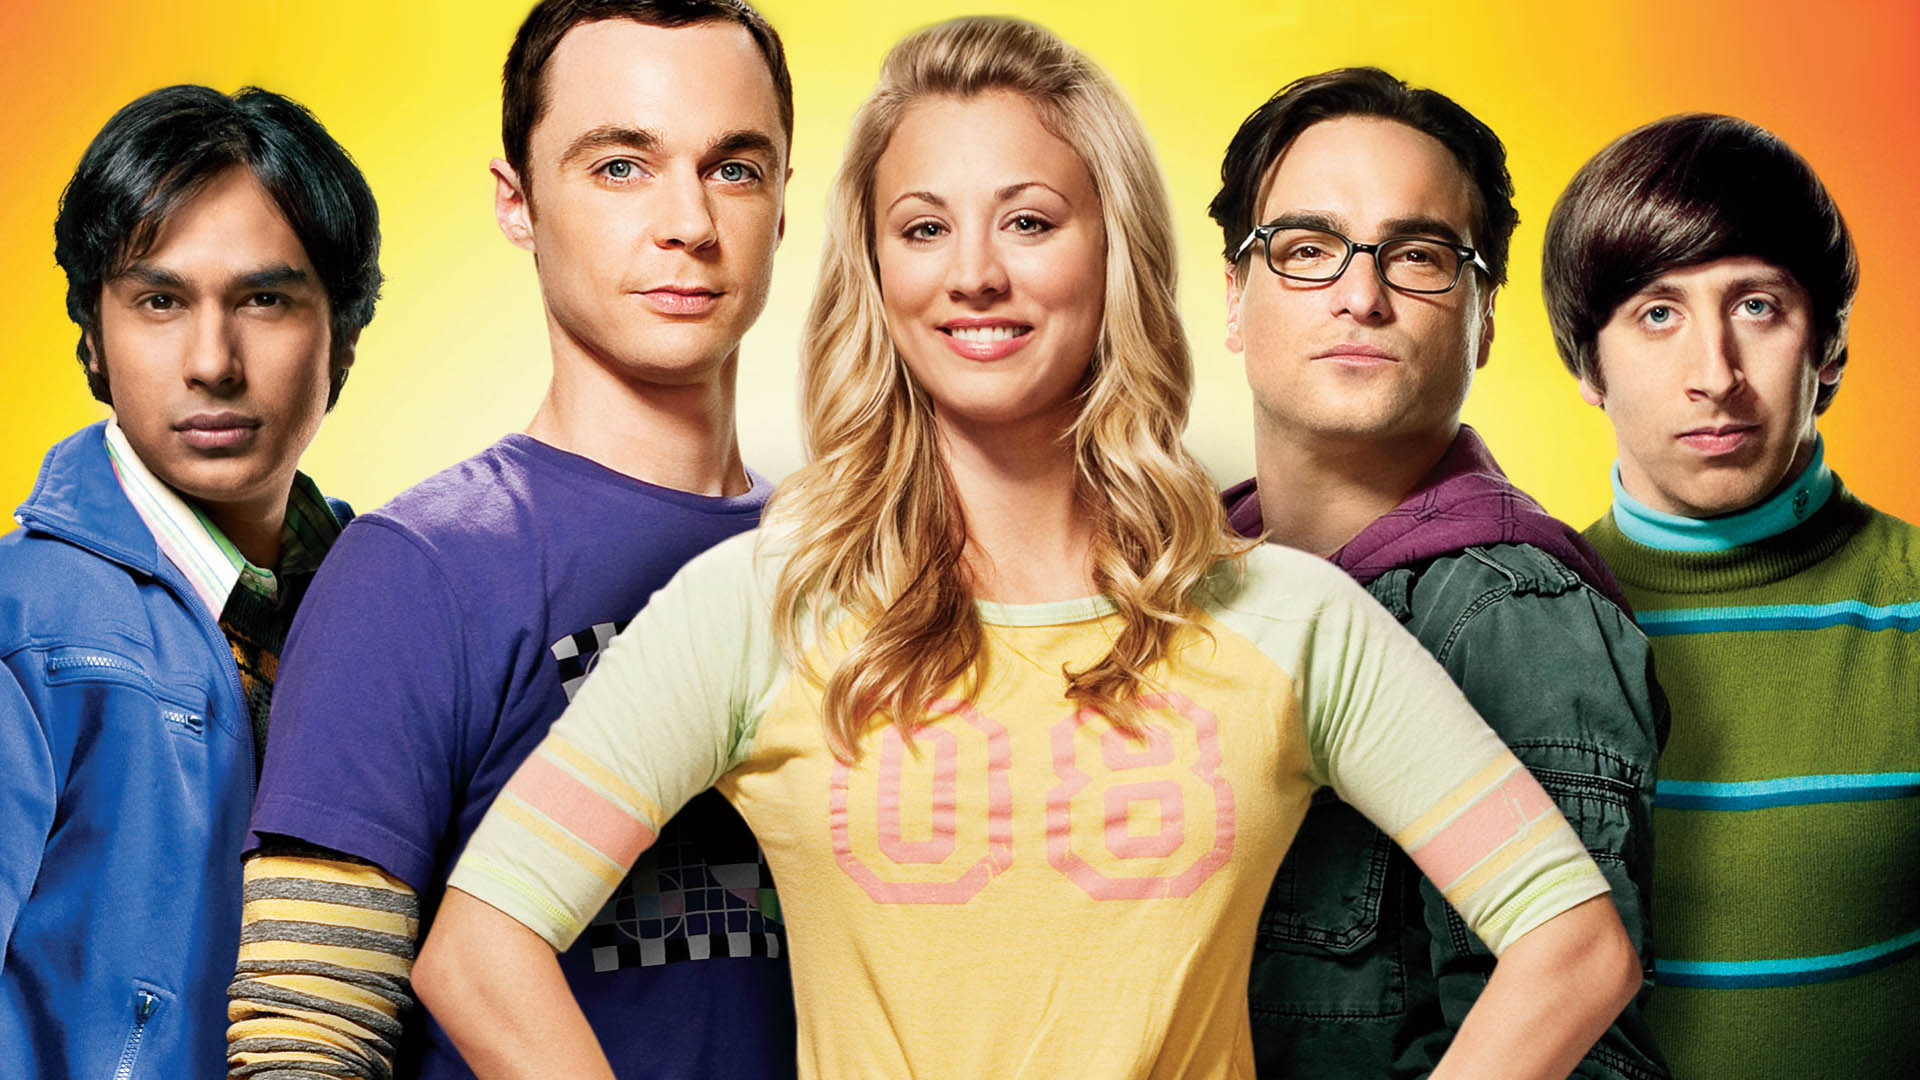 ‘Big Bang Theory’ Cast Members Ink New Deals | mxdwn Television